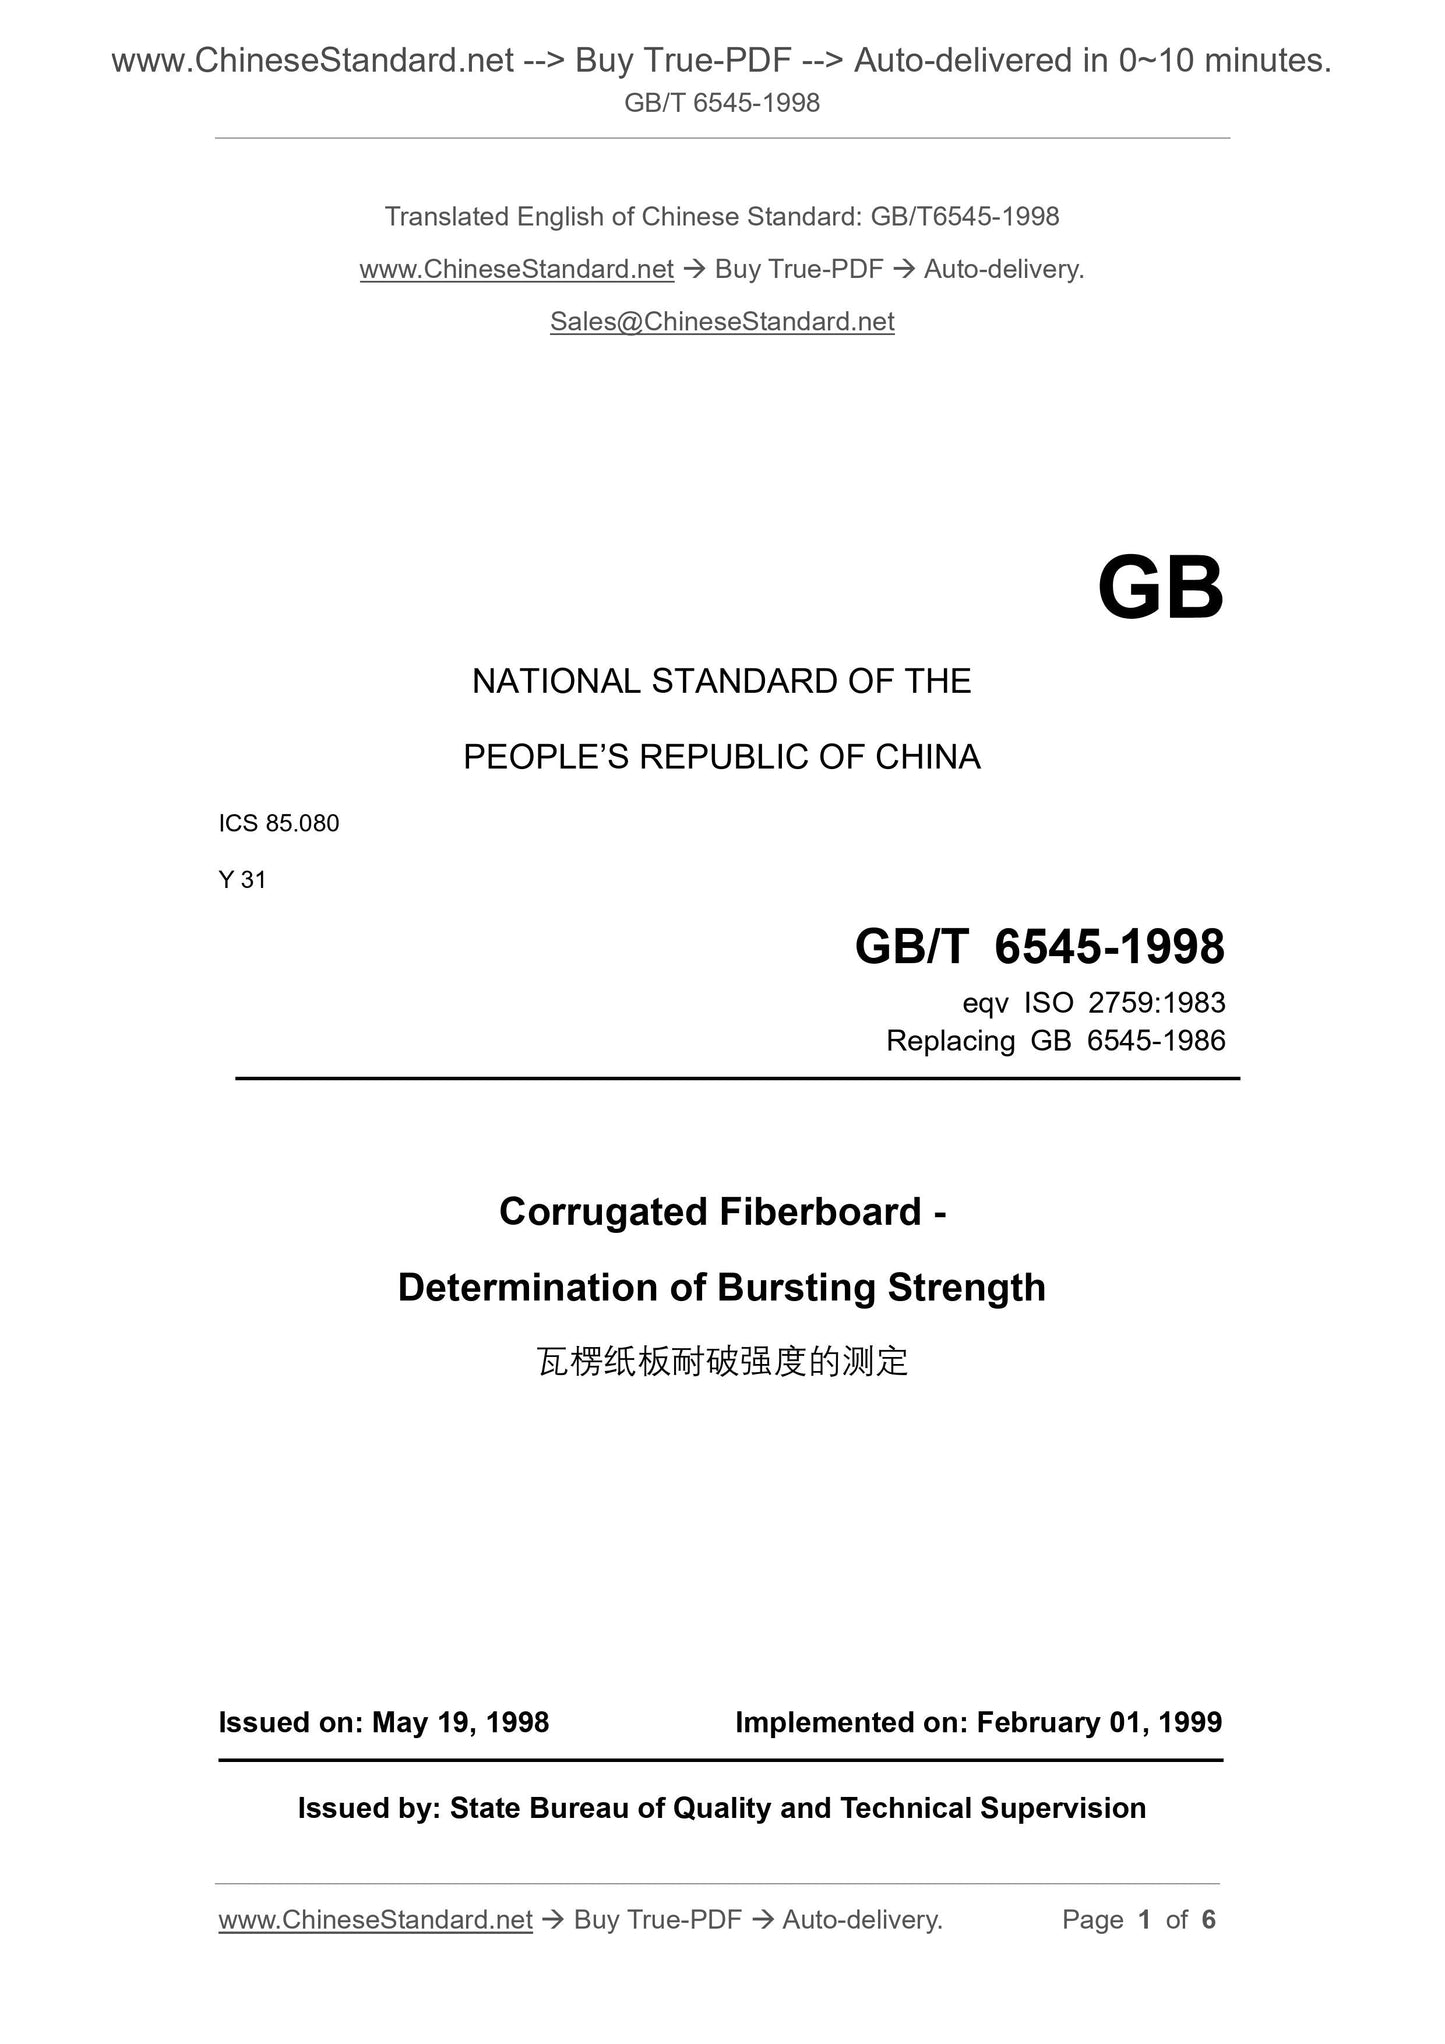 GB/T 6545-1998 Page 1